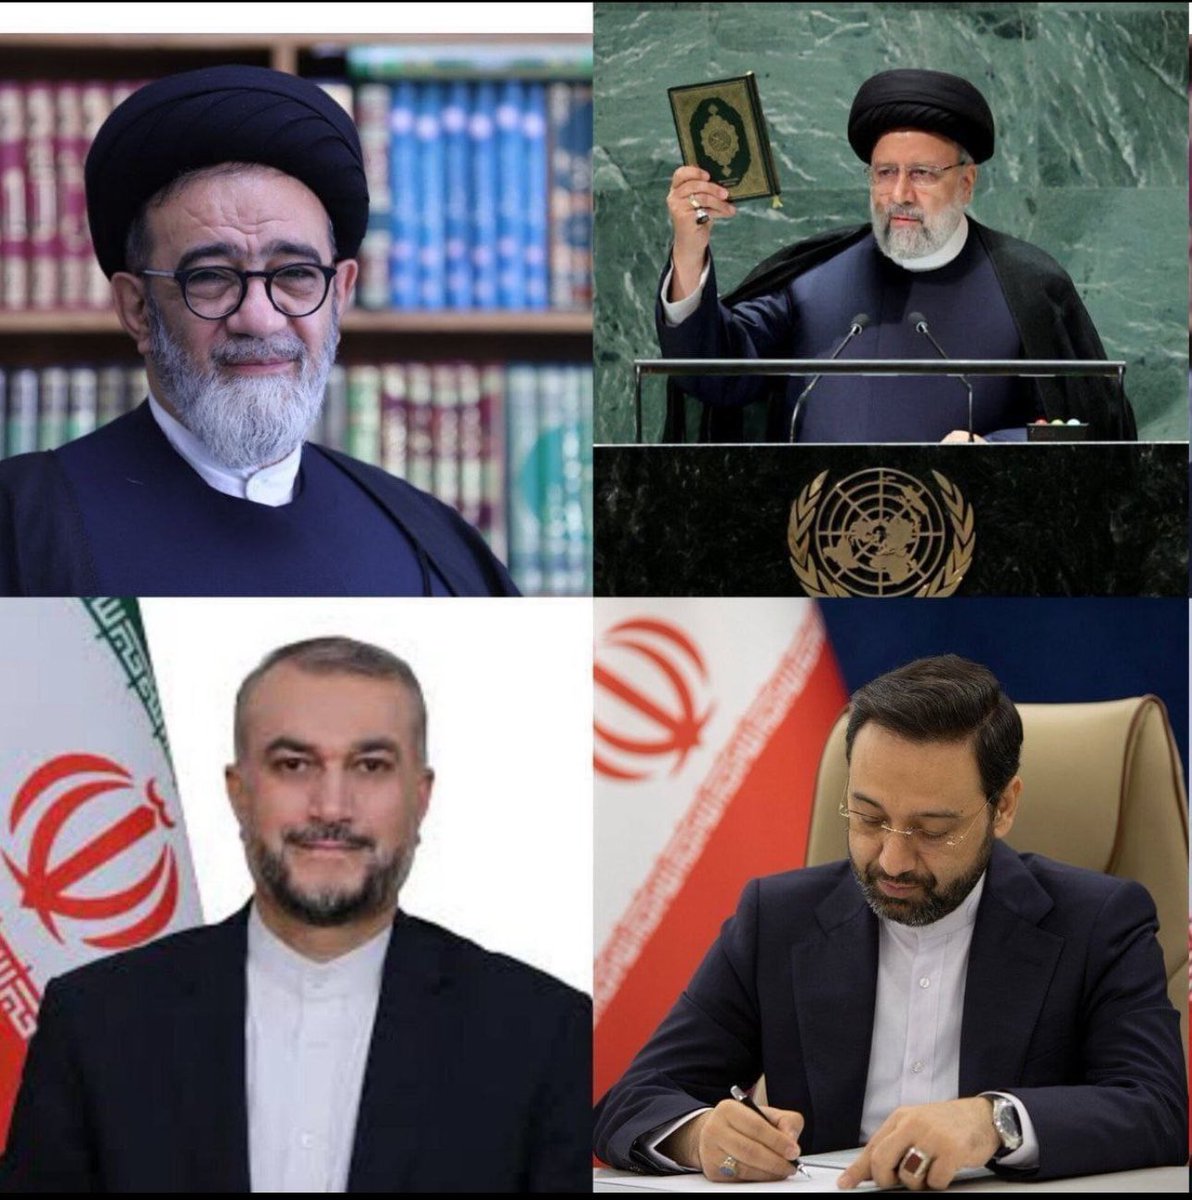 Iran's president, foreign minister and other state officials have died in a helicopter crash Iranian President Ebrahim Raisi, a hardliner viewed as a likely successor to Supreme Leader Ayatollah Ali Khamenei, died in a helicopter crash near the Azerbaijan border, officials and